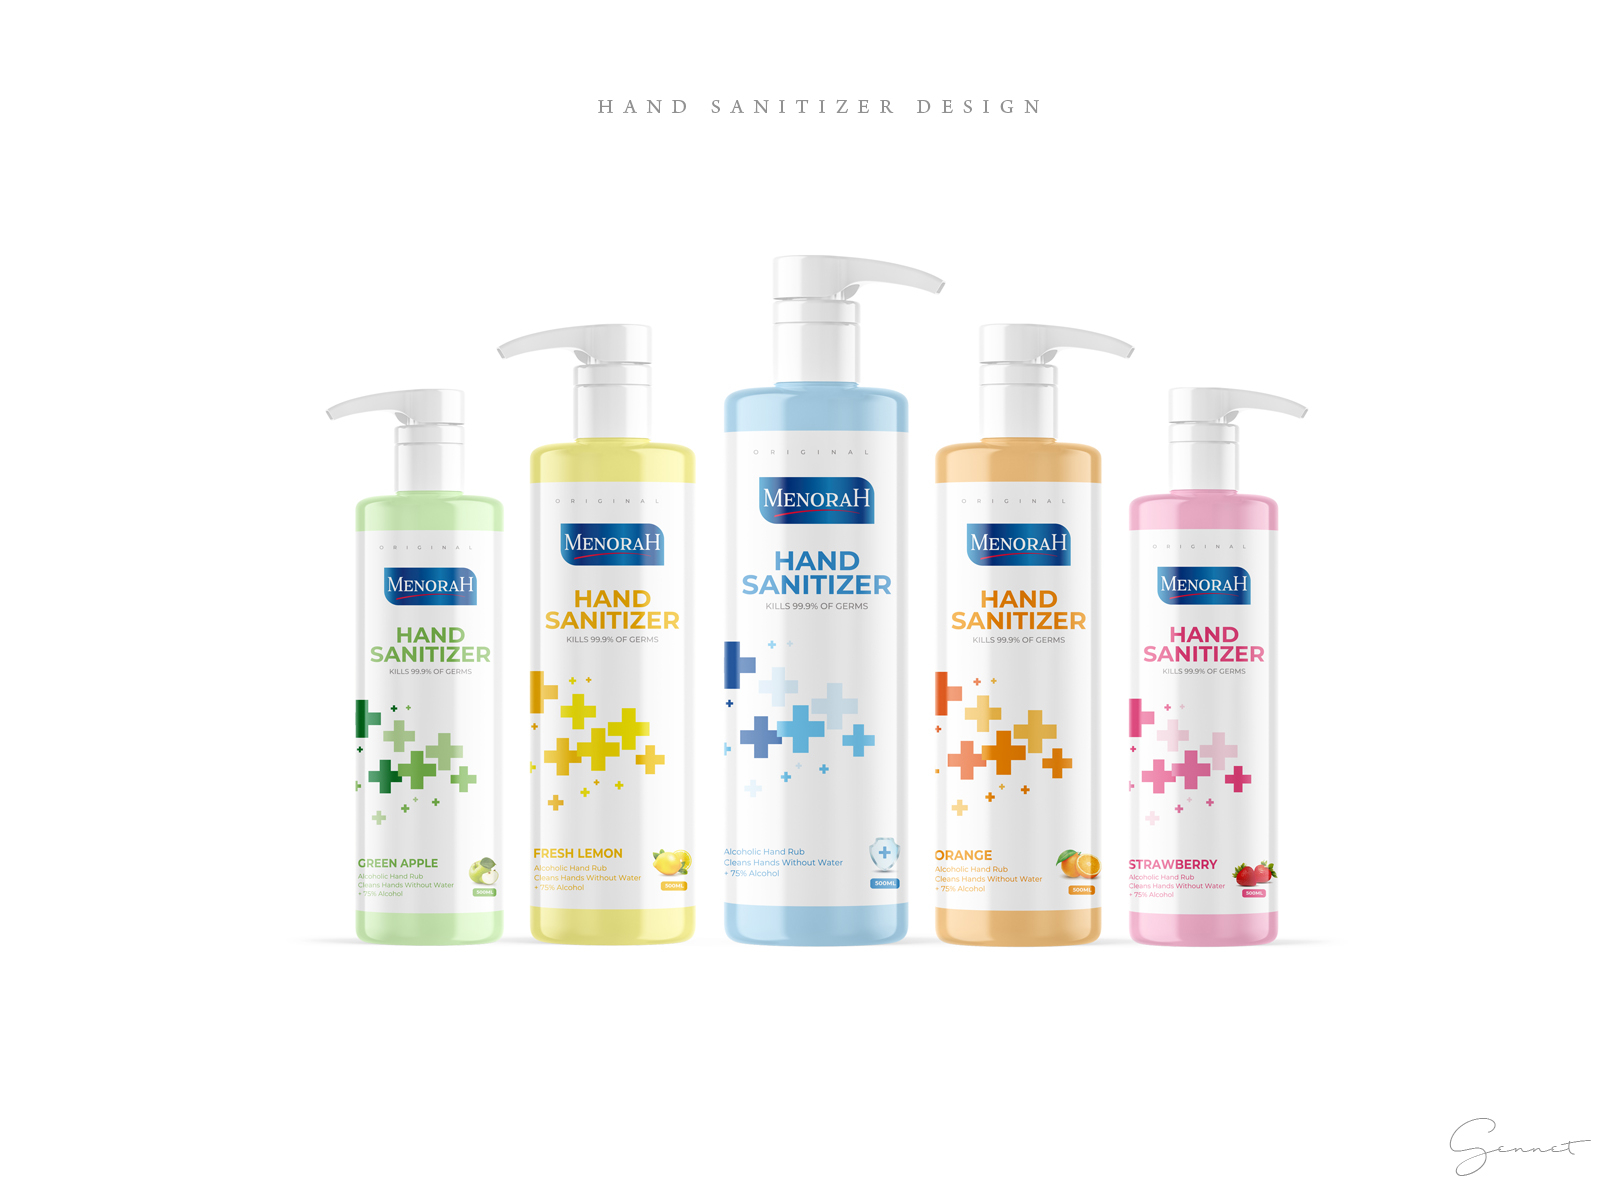 Download Hand Sanitizer Design By Preeth Gennet On Dribbble PSD Mockup Templates